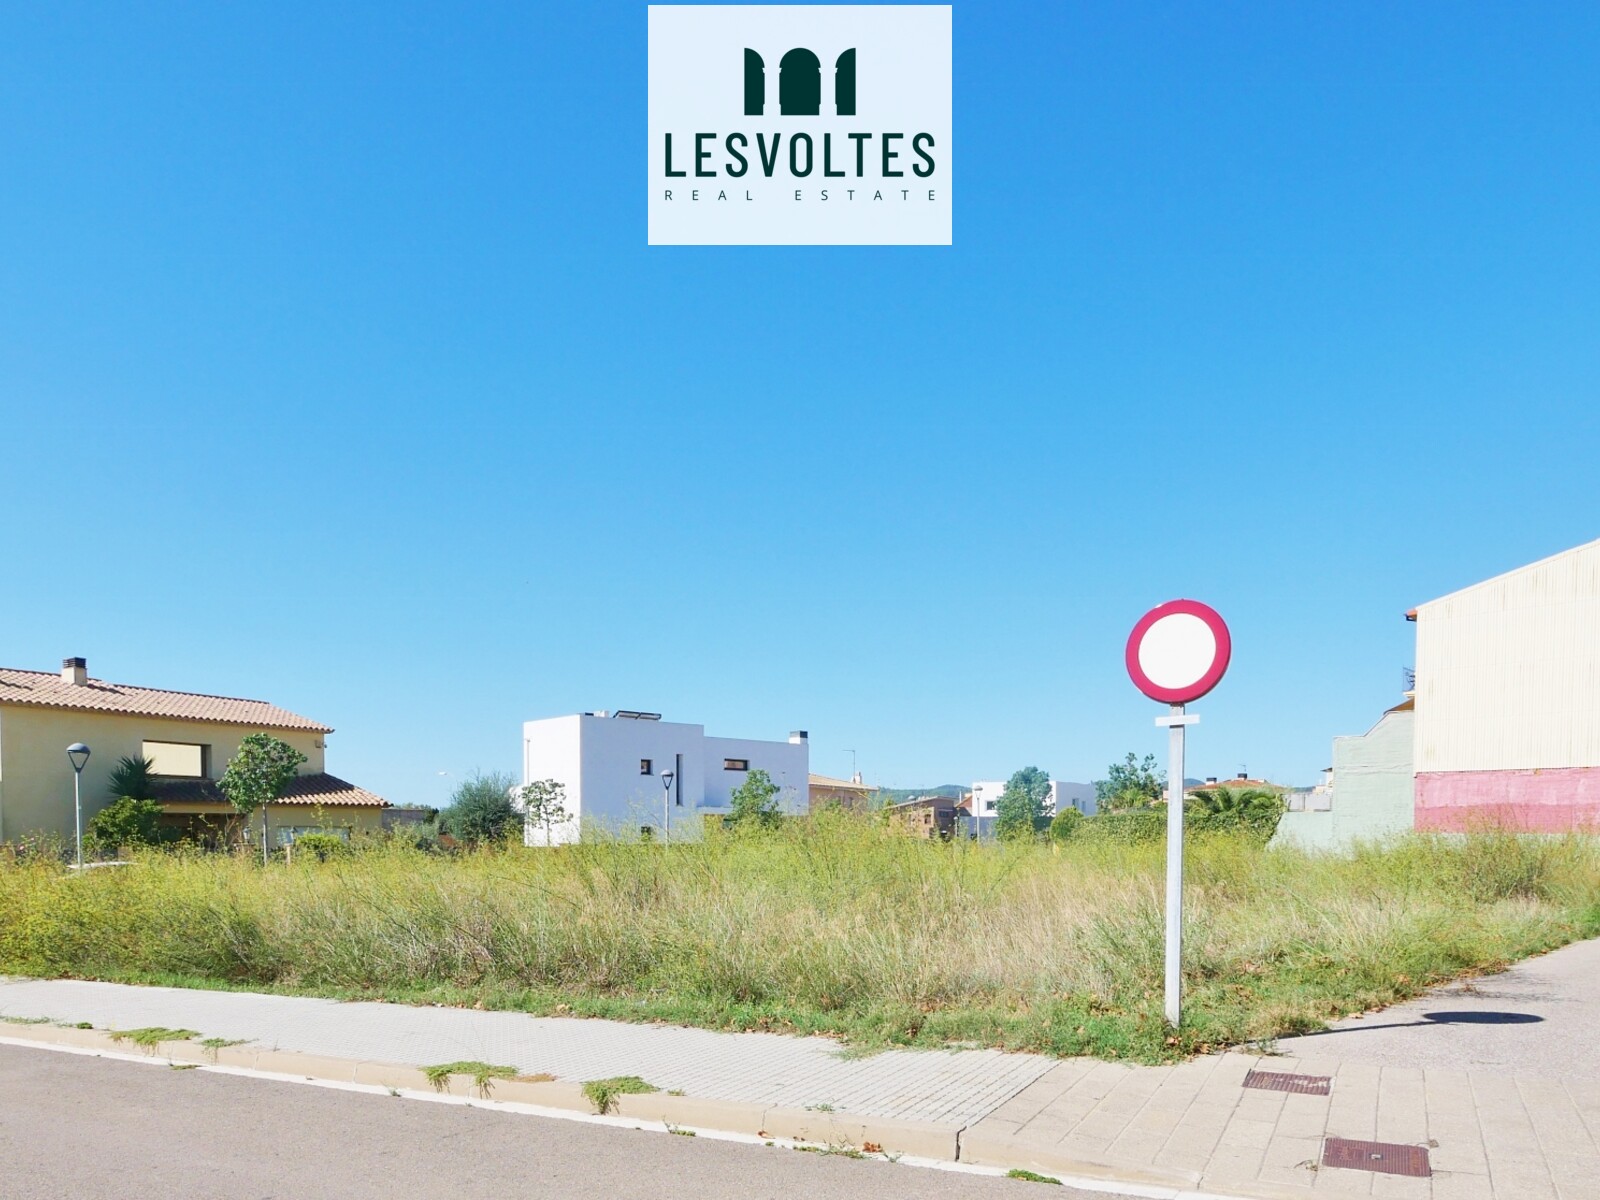 PLOT 756M2 FOR PLURIFAMILIARY BUILDING FOR SALE IN PALAFRUGELL. BRUGUEROL AREA.